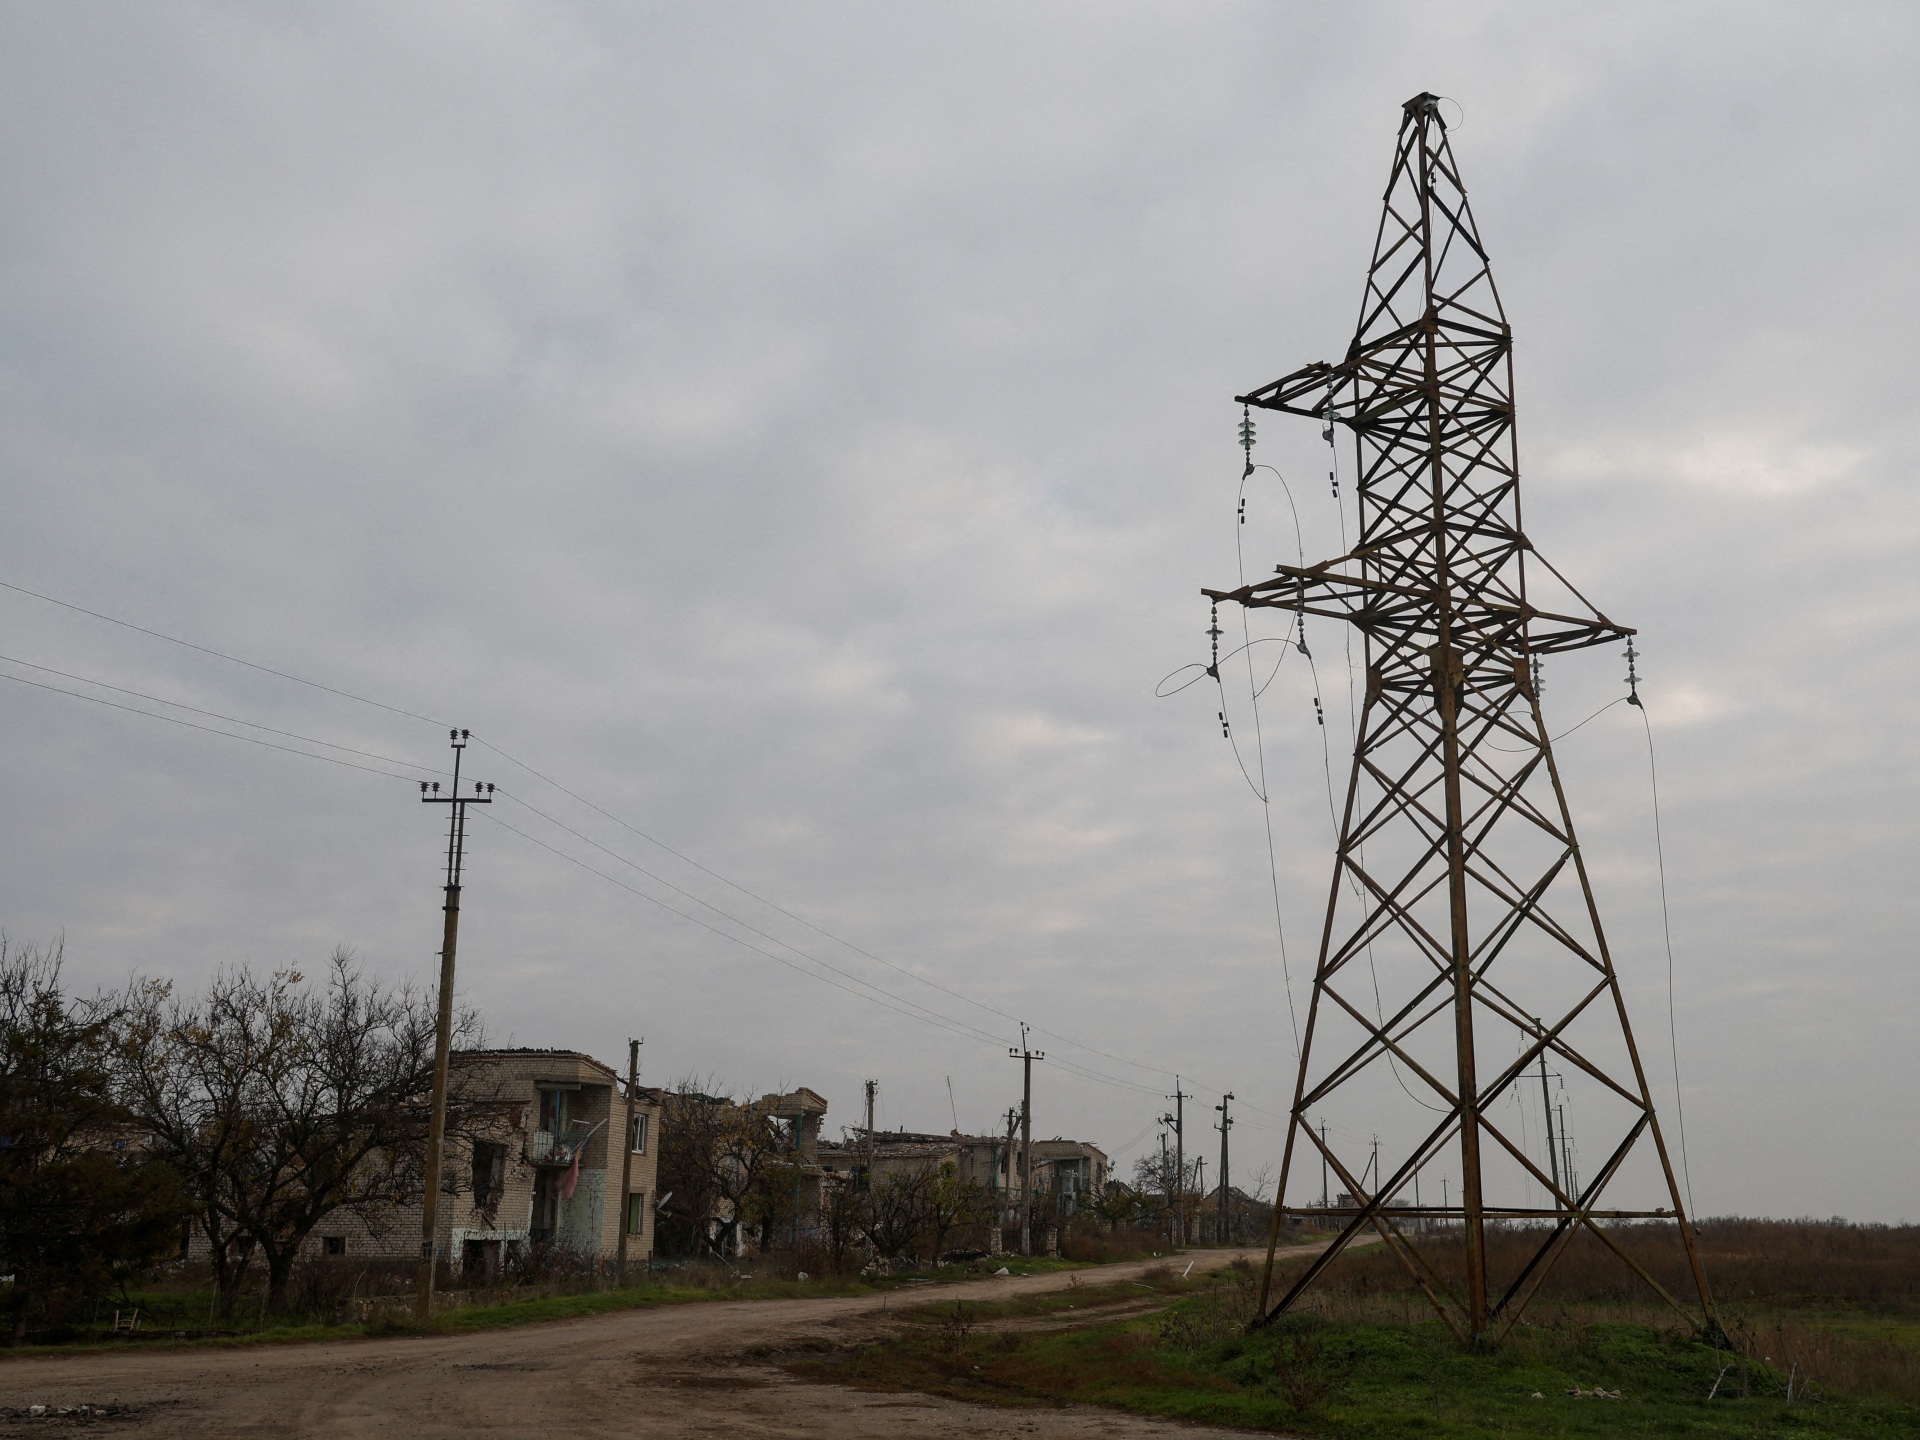 Zelenskyy says Russia destroyed Kherson’s critical infrastructure